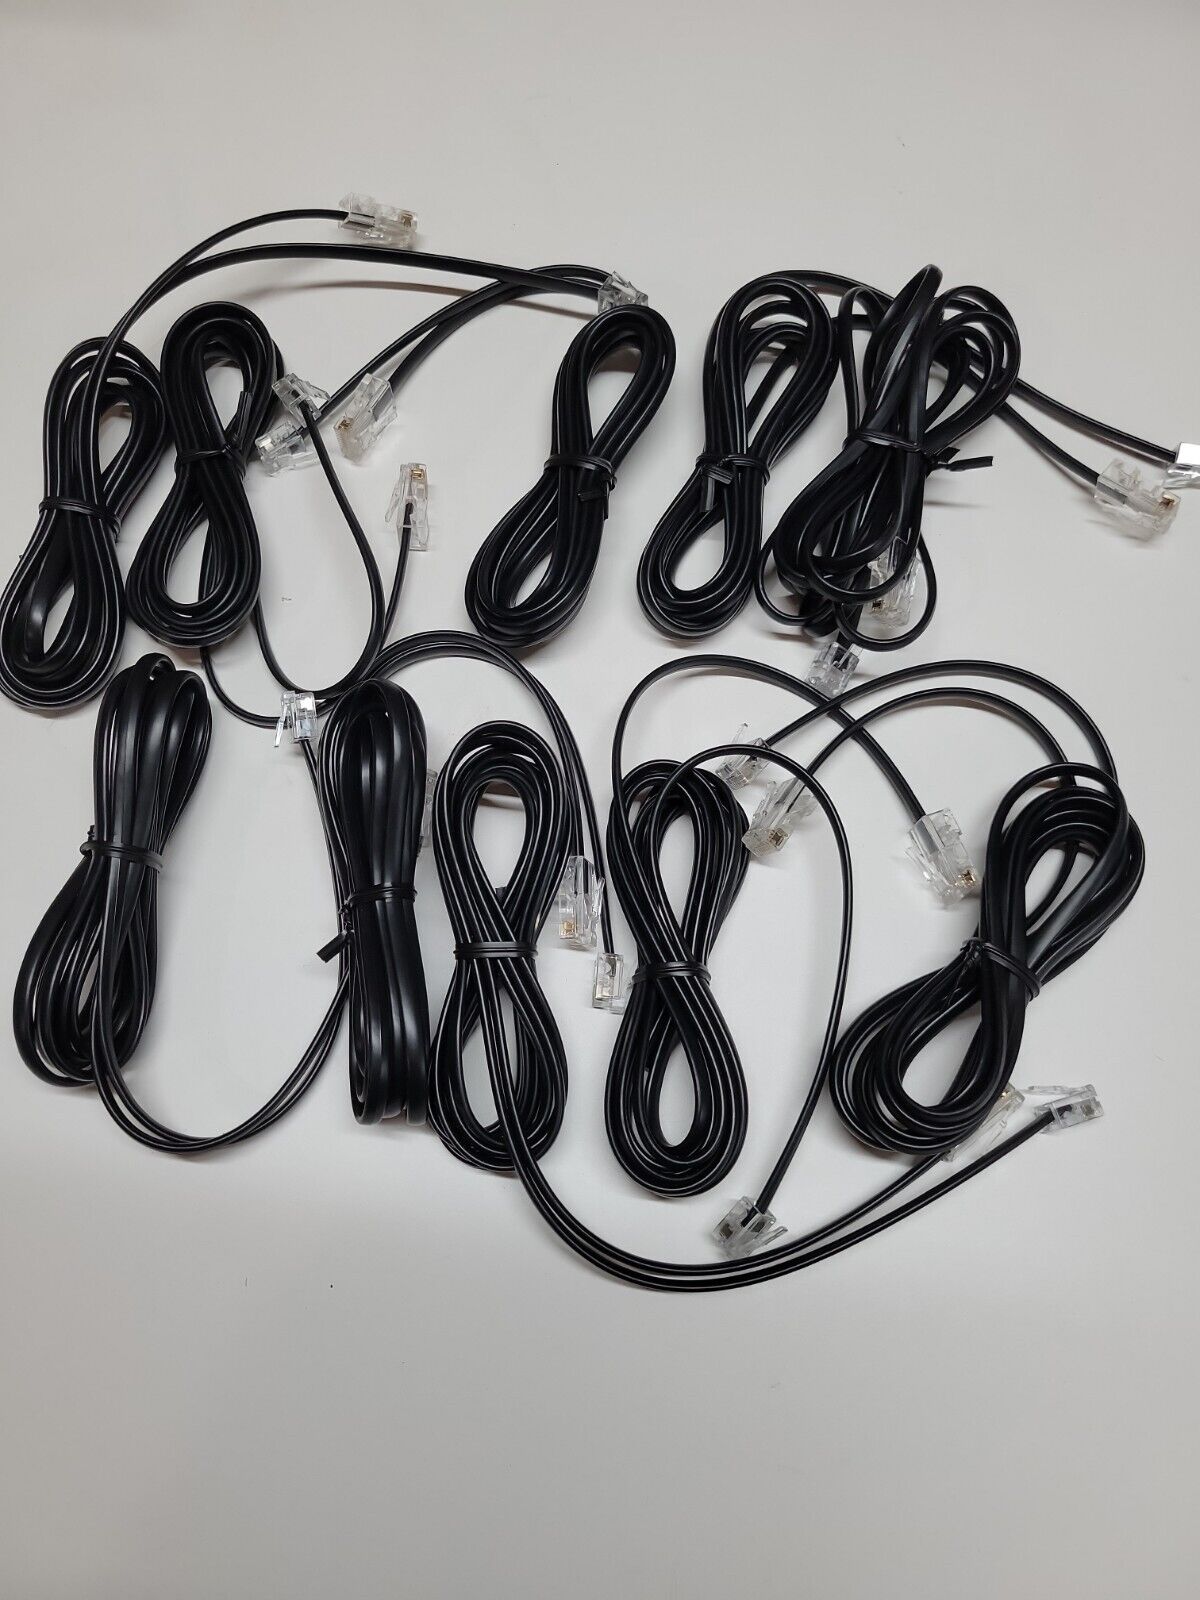 Group Of 10 RJ-11 TO RJ-45 CABLES